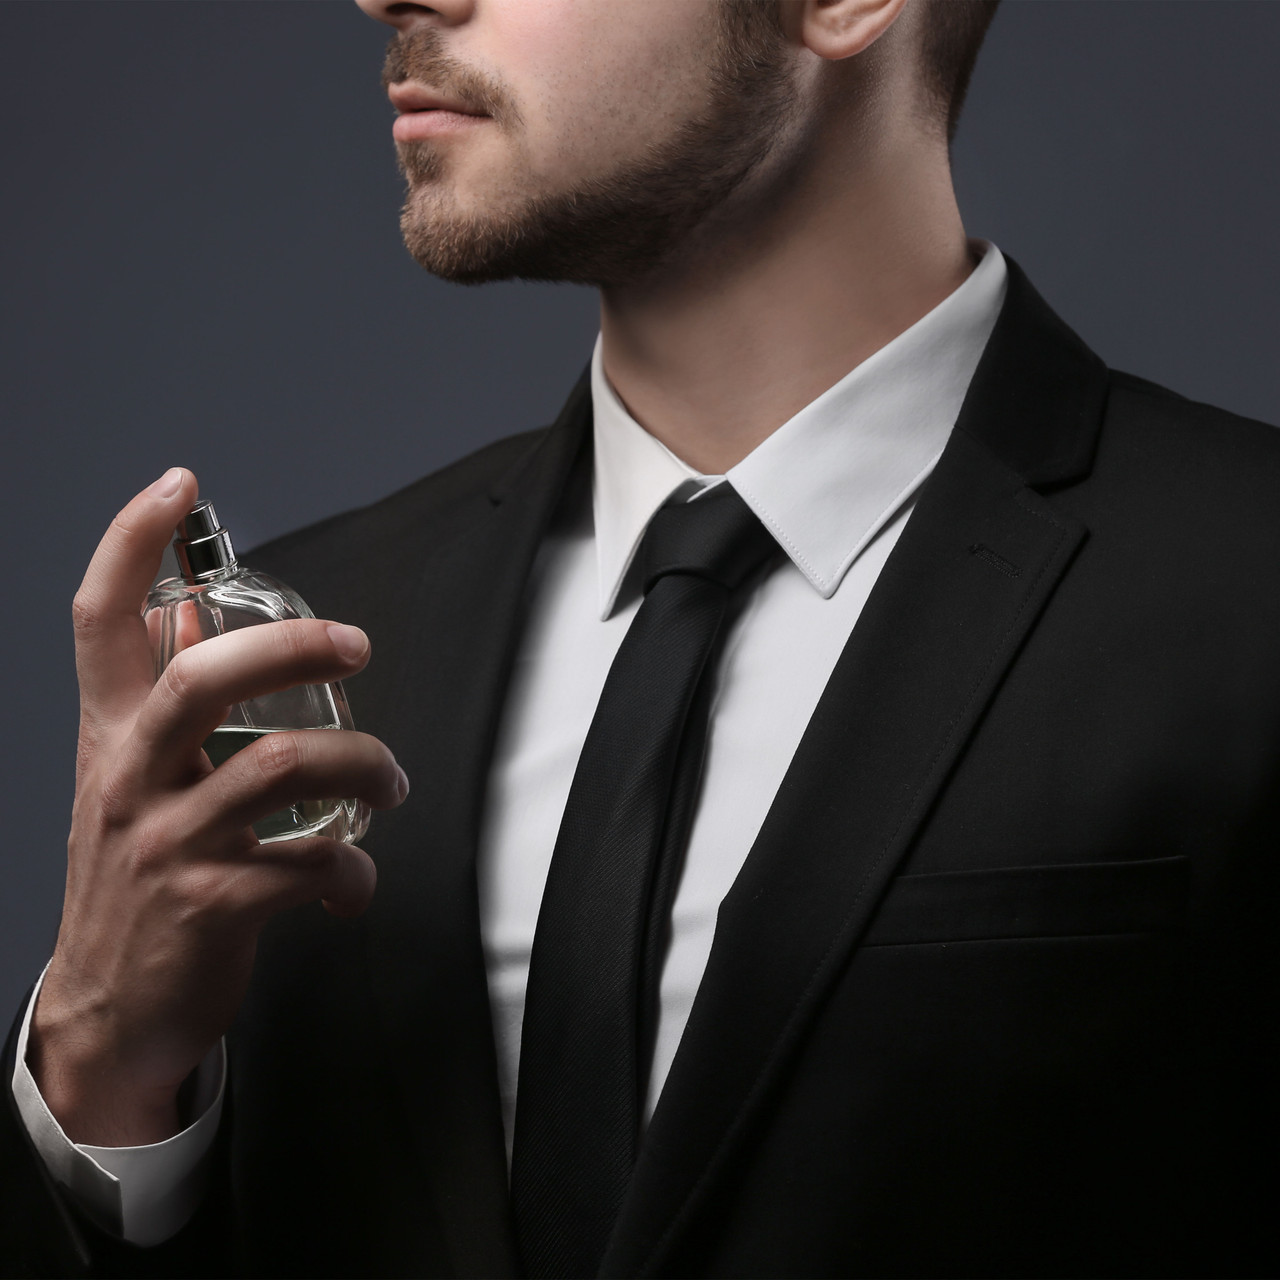 6 Refined Dior Homme Fragrances Every Man Should Wear